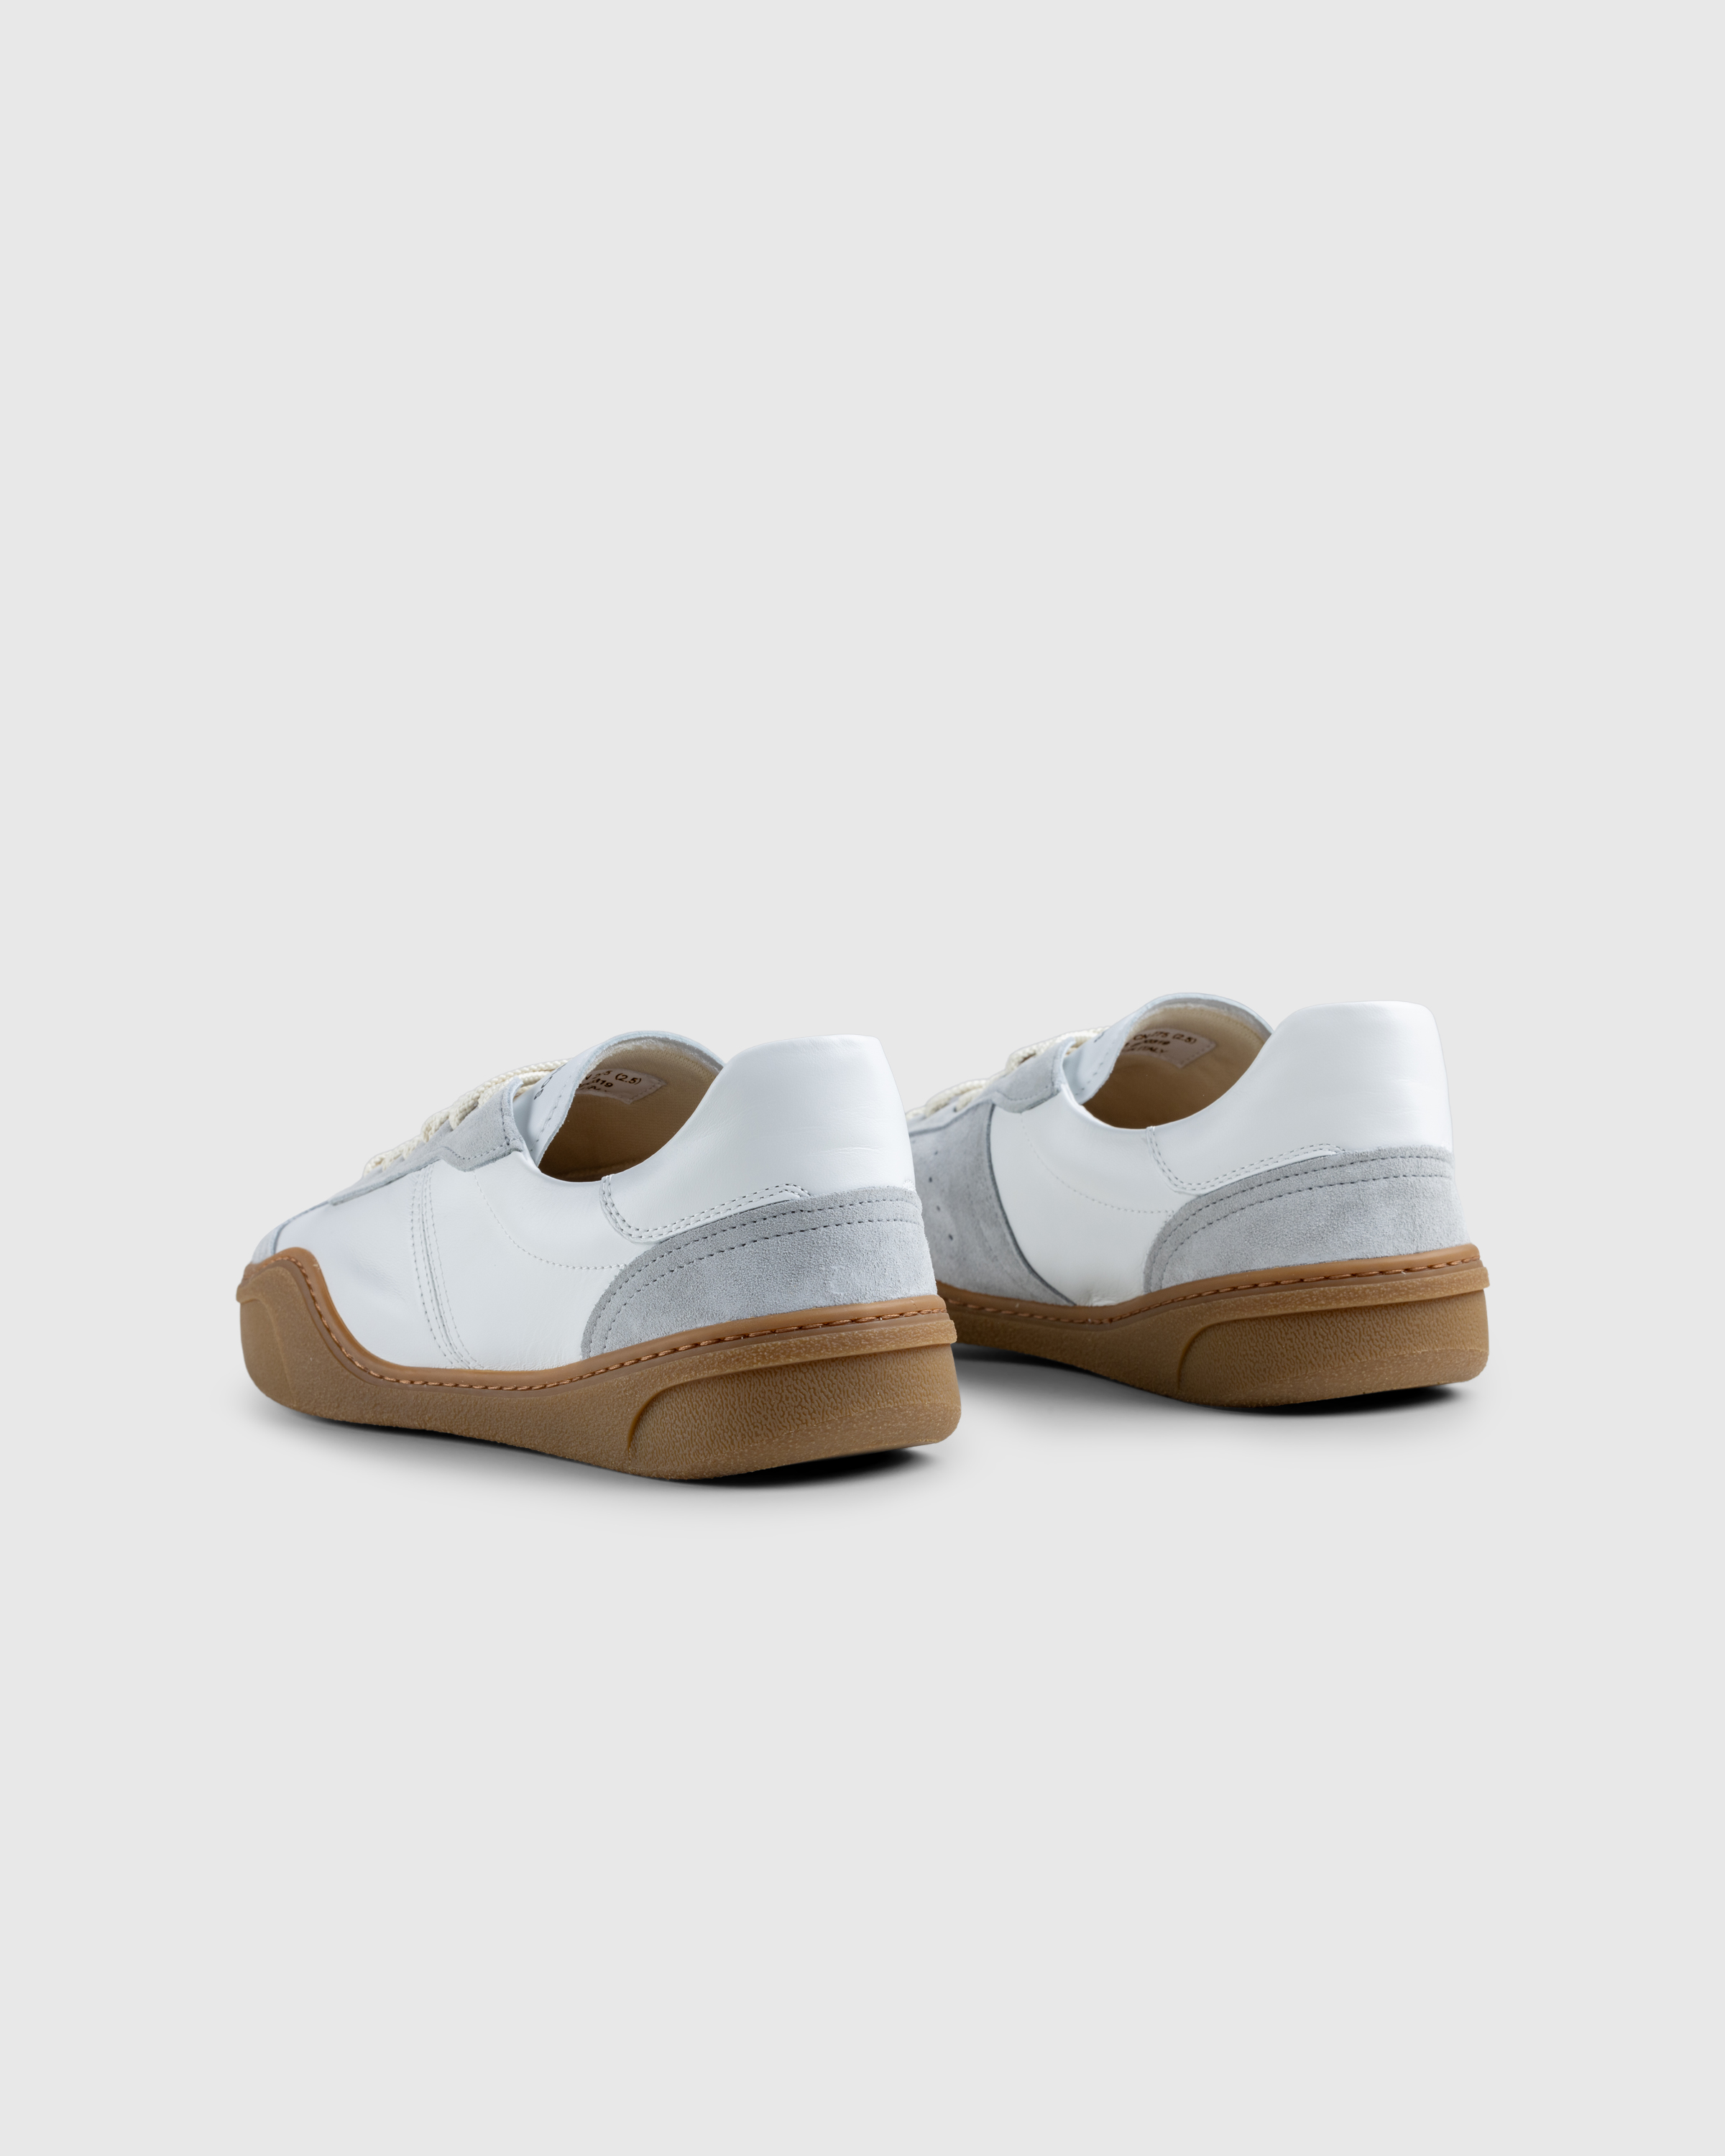 Acne Studios – Lace-Up Sneakers White/Brown - Low Top Sneakers - White - Image 4